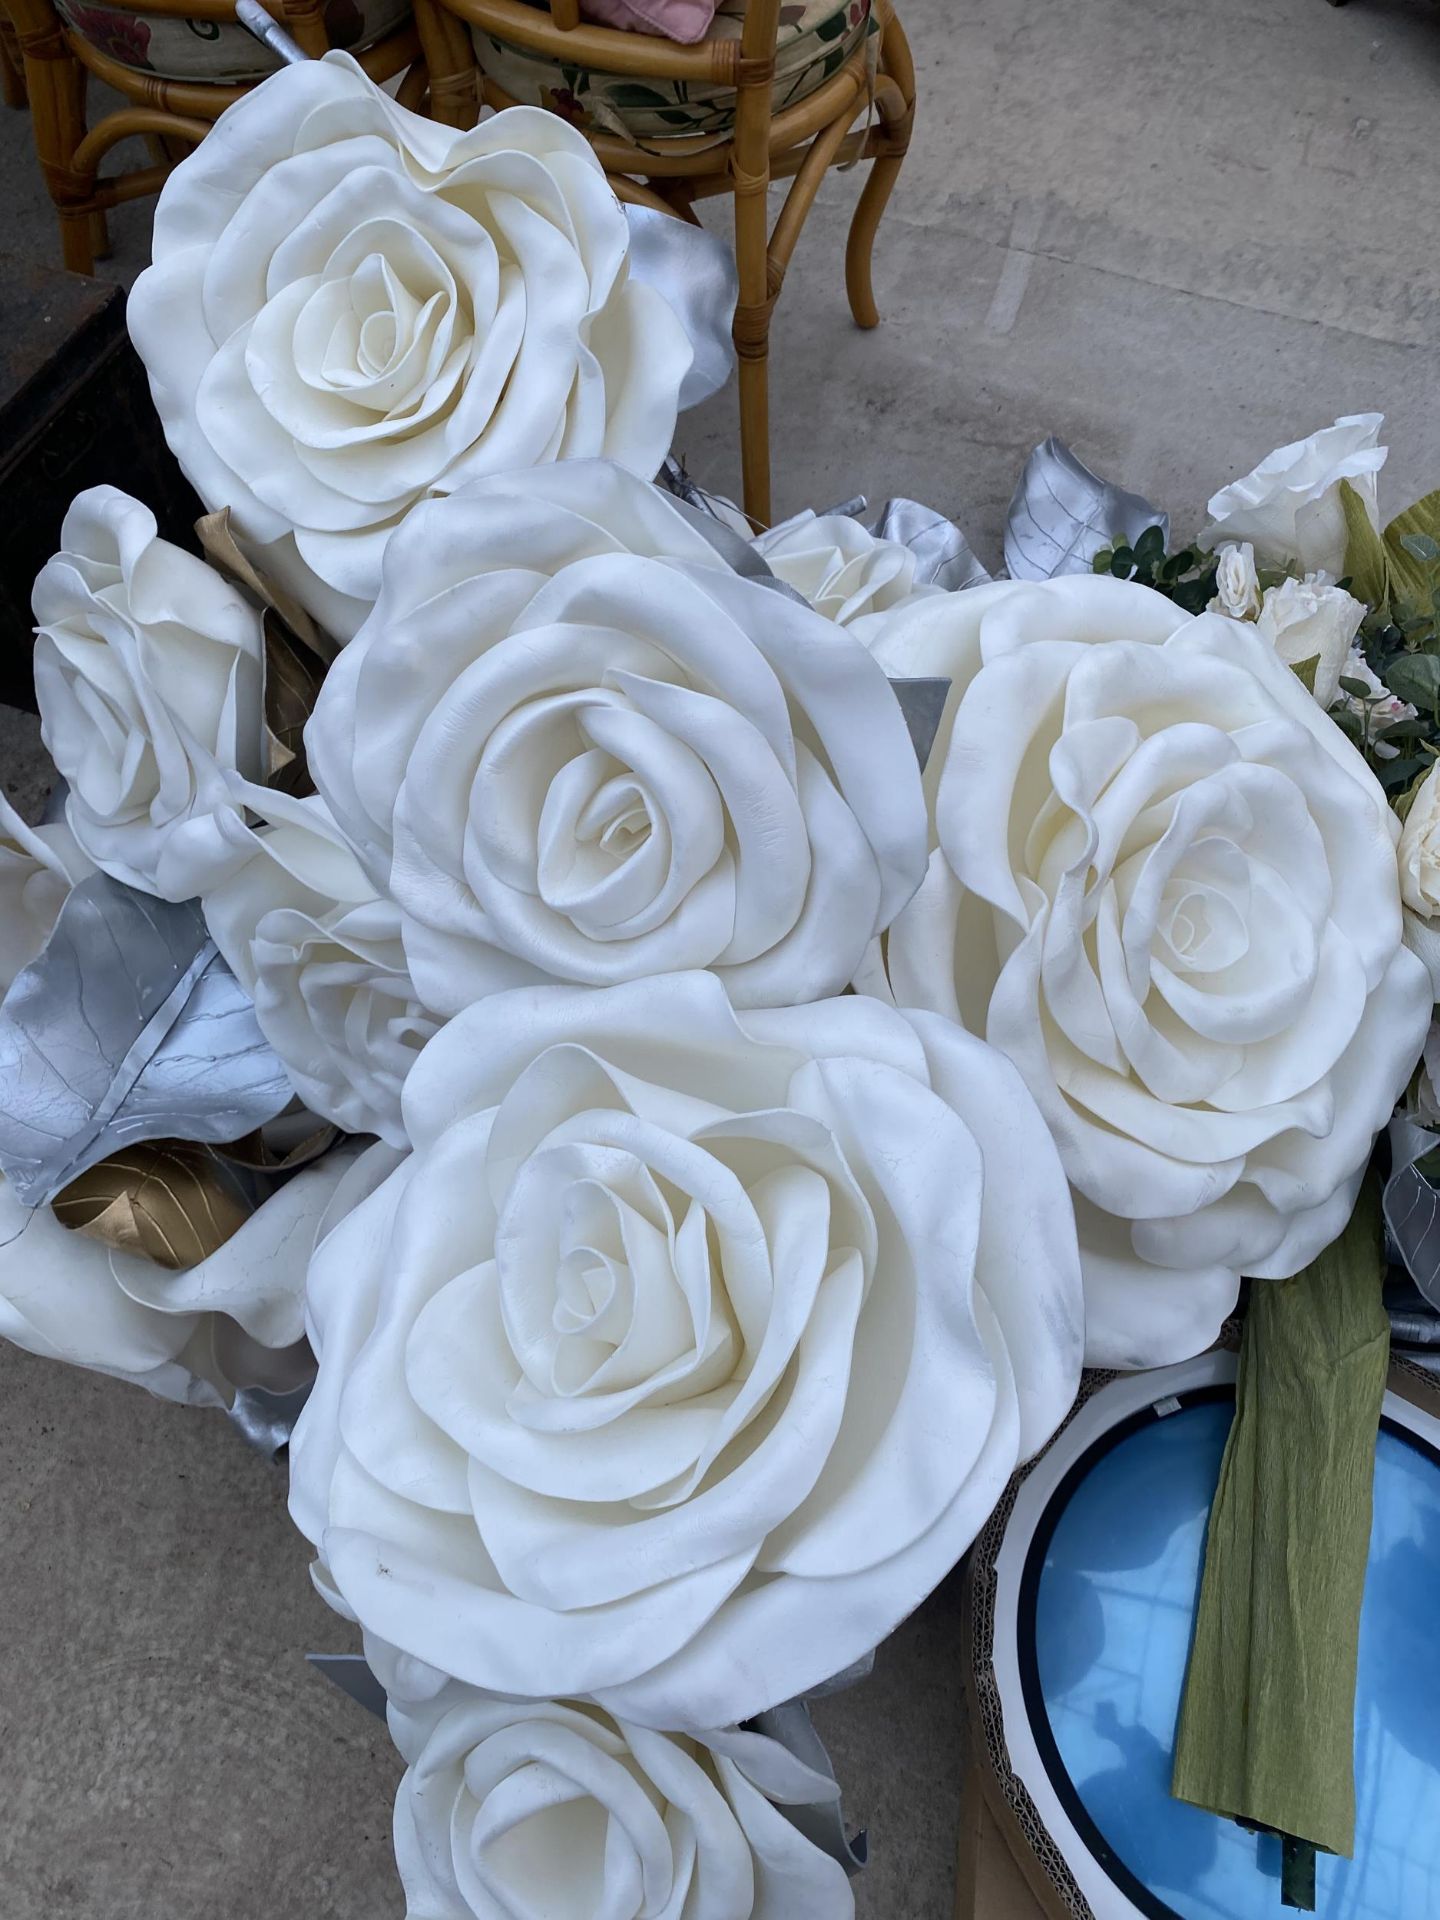 A LARGE QUANTITY OF ARTIFICIAL WEDDING FLOWERS AND DECORATIONS - Image 4 of 10